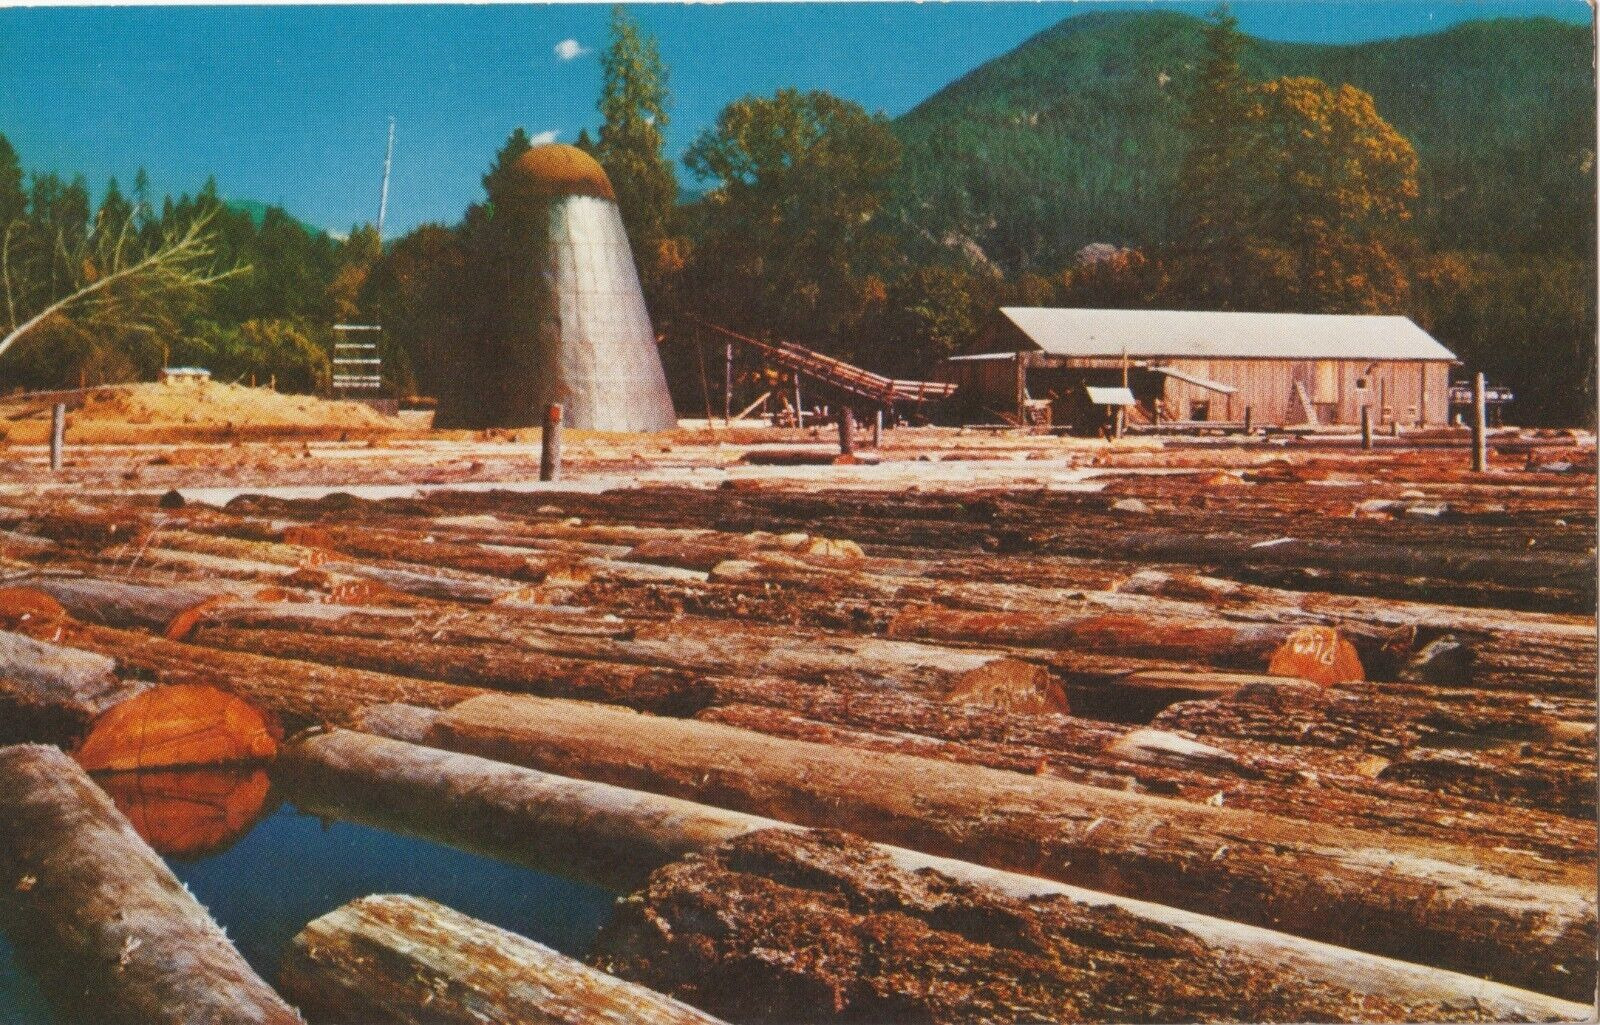 The Old Saw Mill-Oregon-vintage unposted postcard